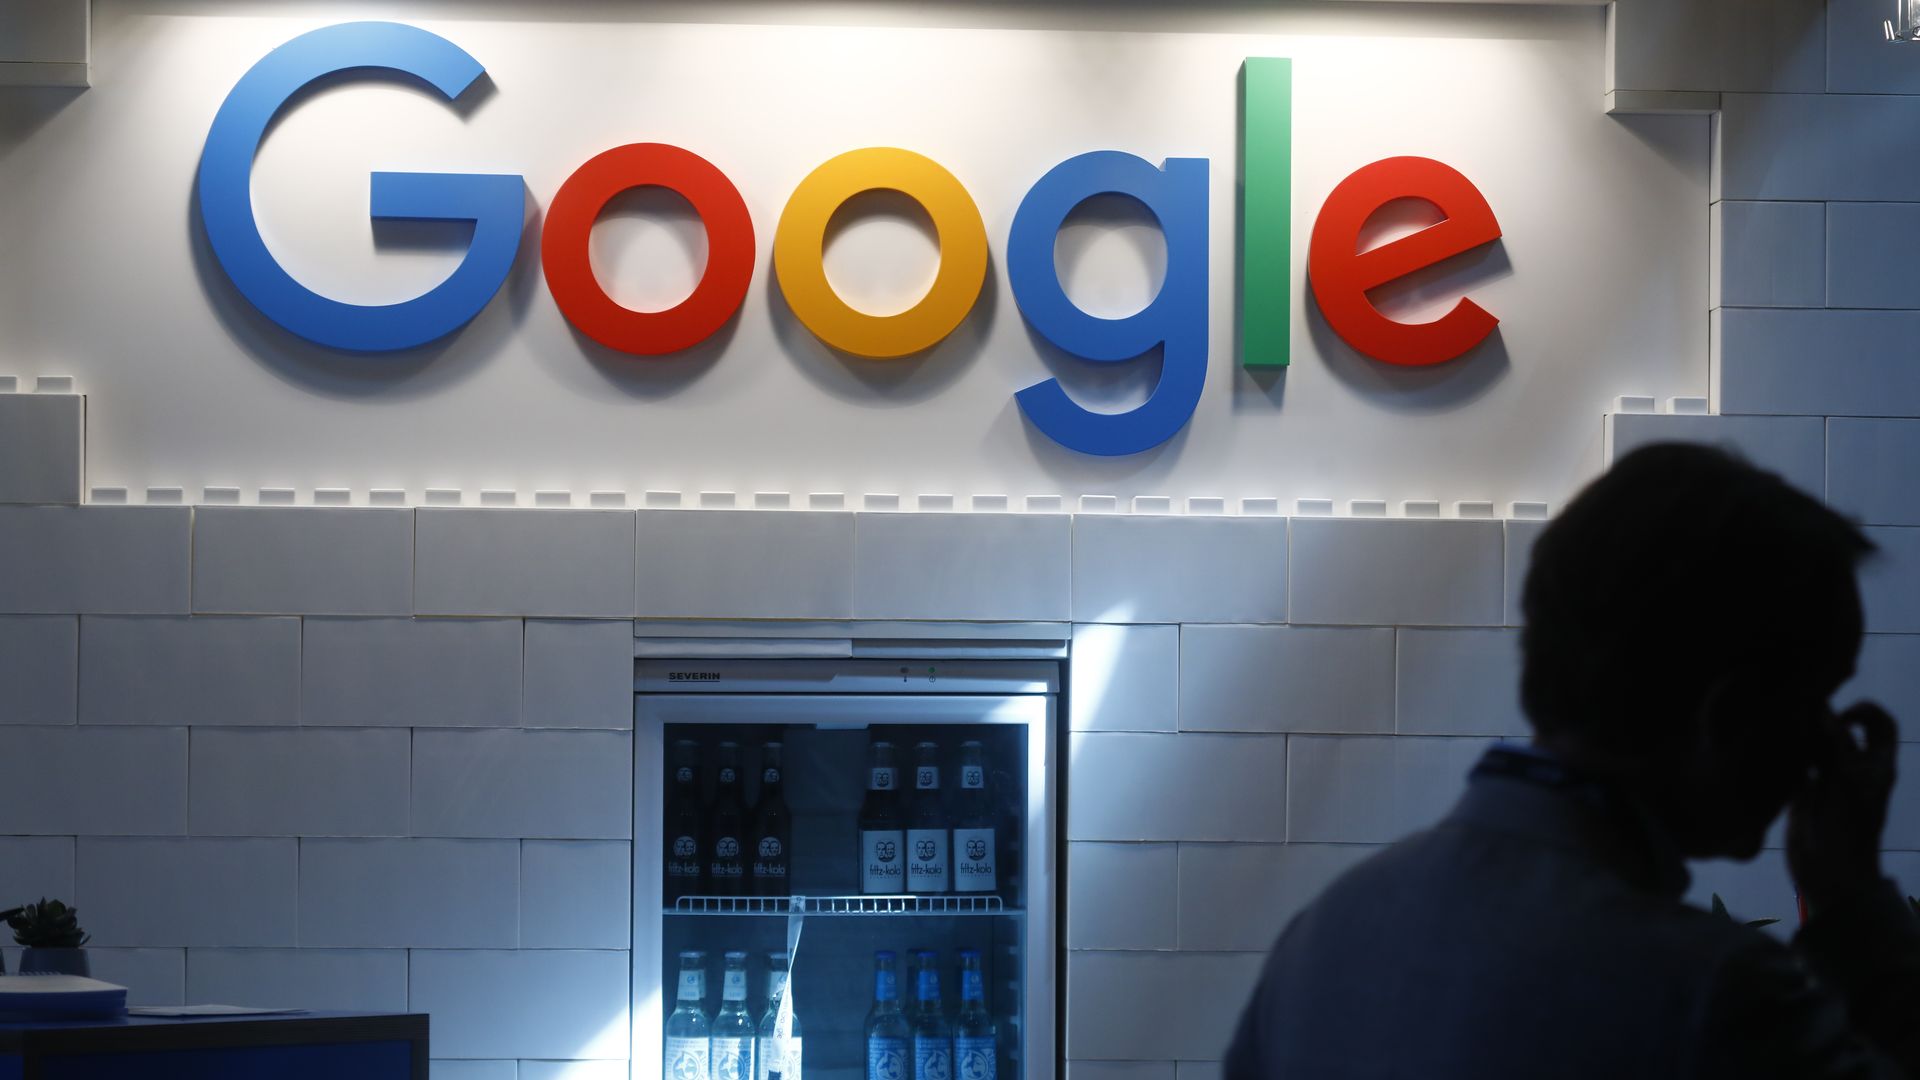 Google sign against a cinderblock wall over a refrigerator